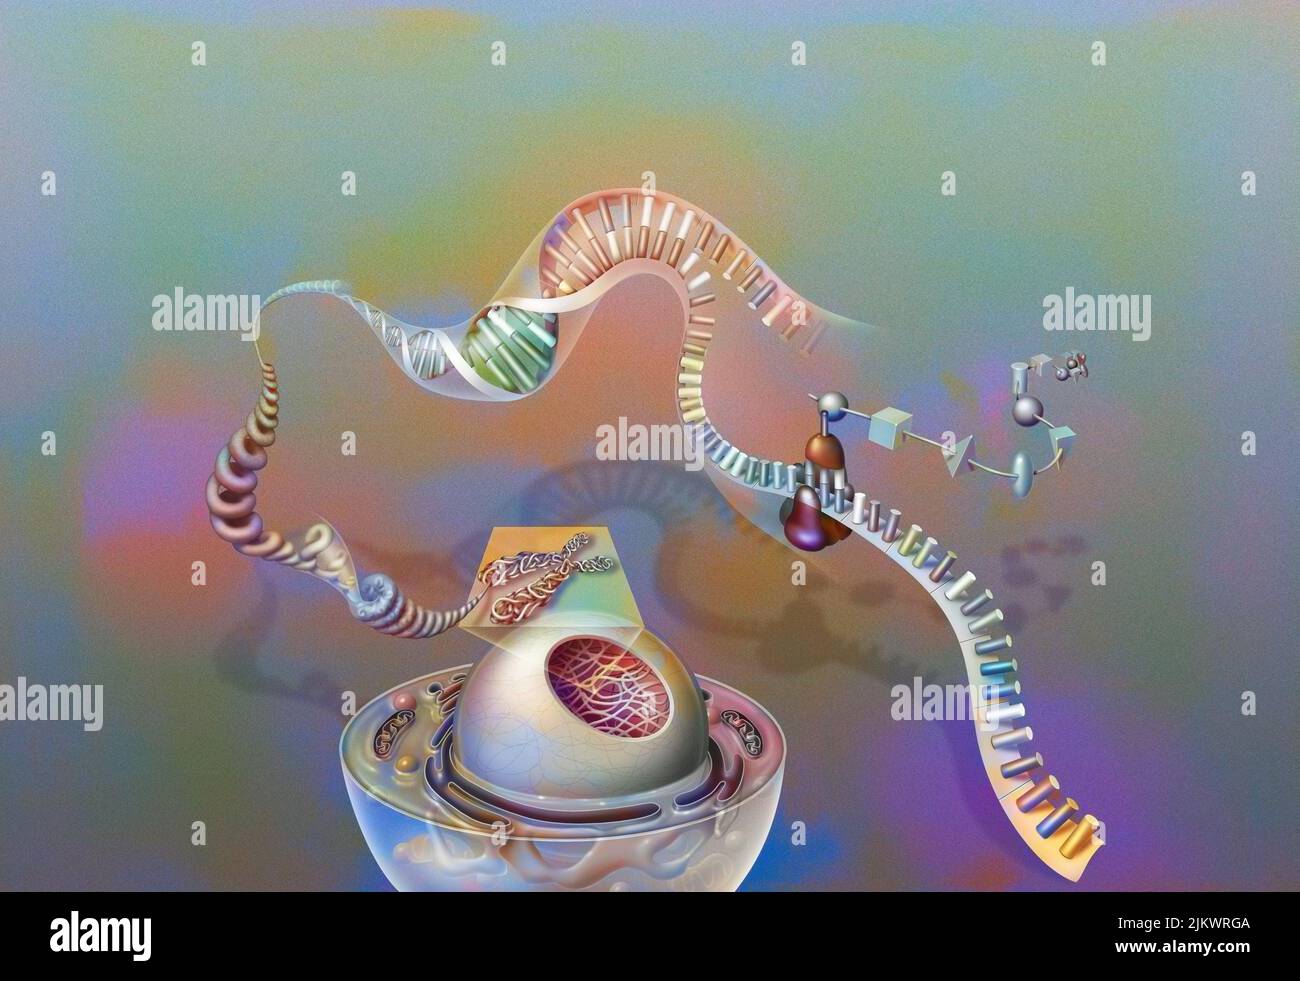 Genes: nucleus of a cell with chromosome, chromatin, DNA helix, genes, ribosome, proteins. Stock Photo